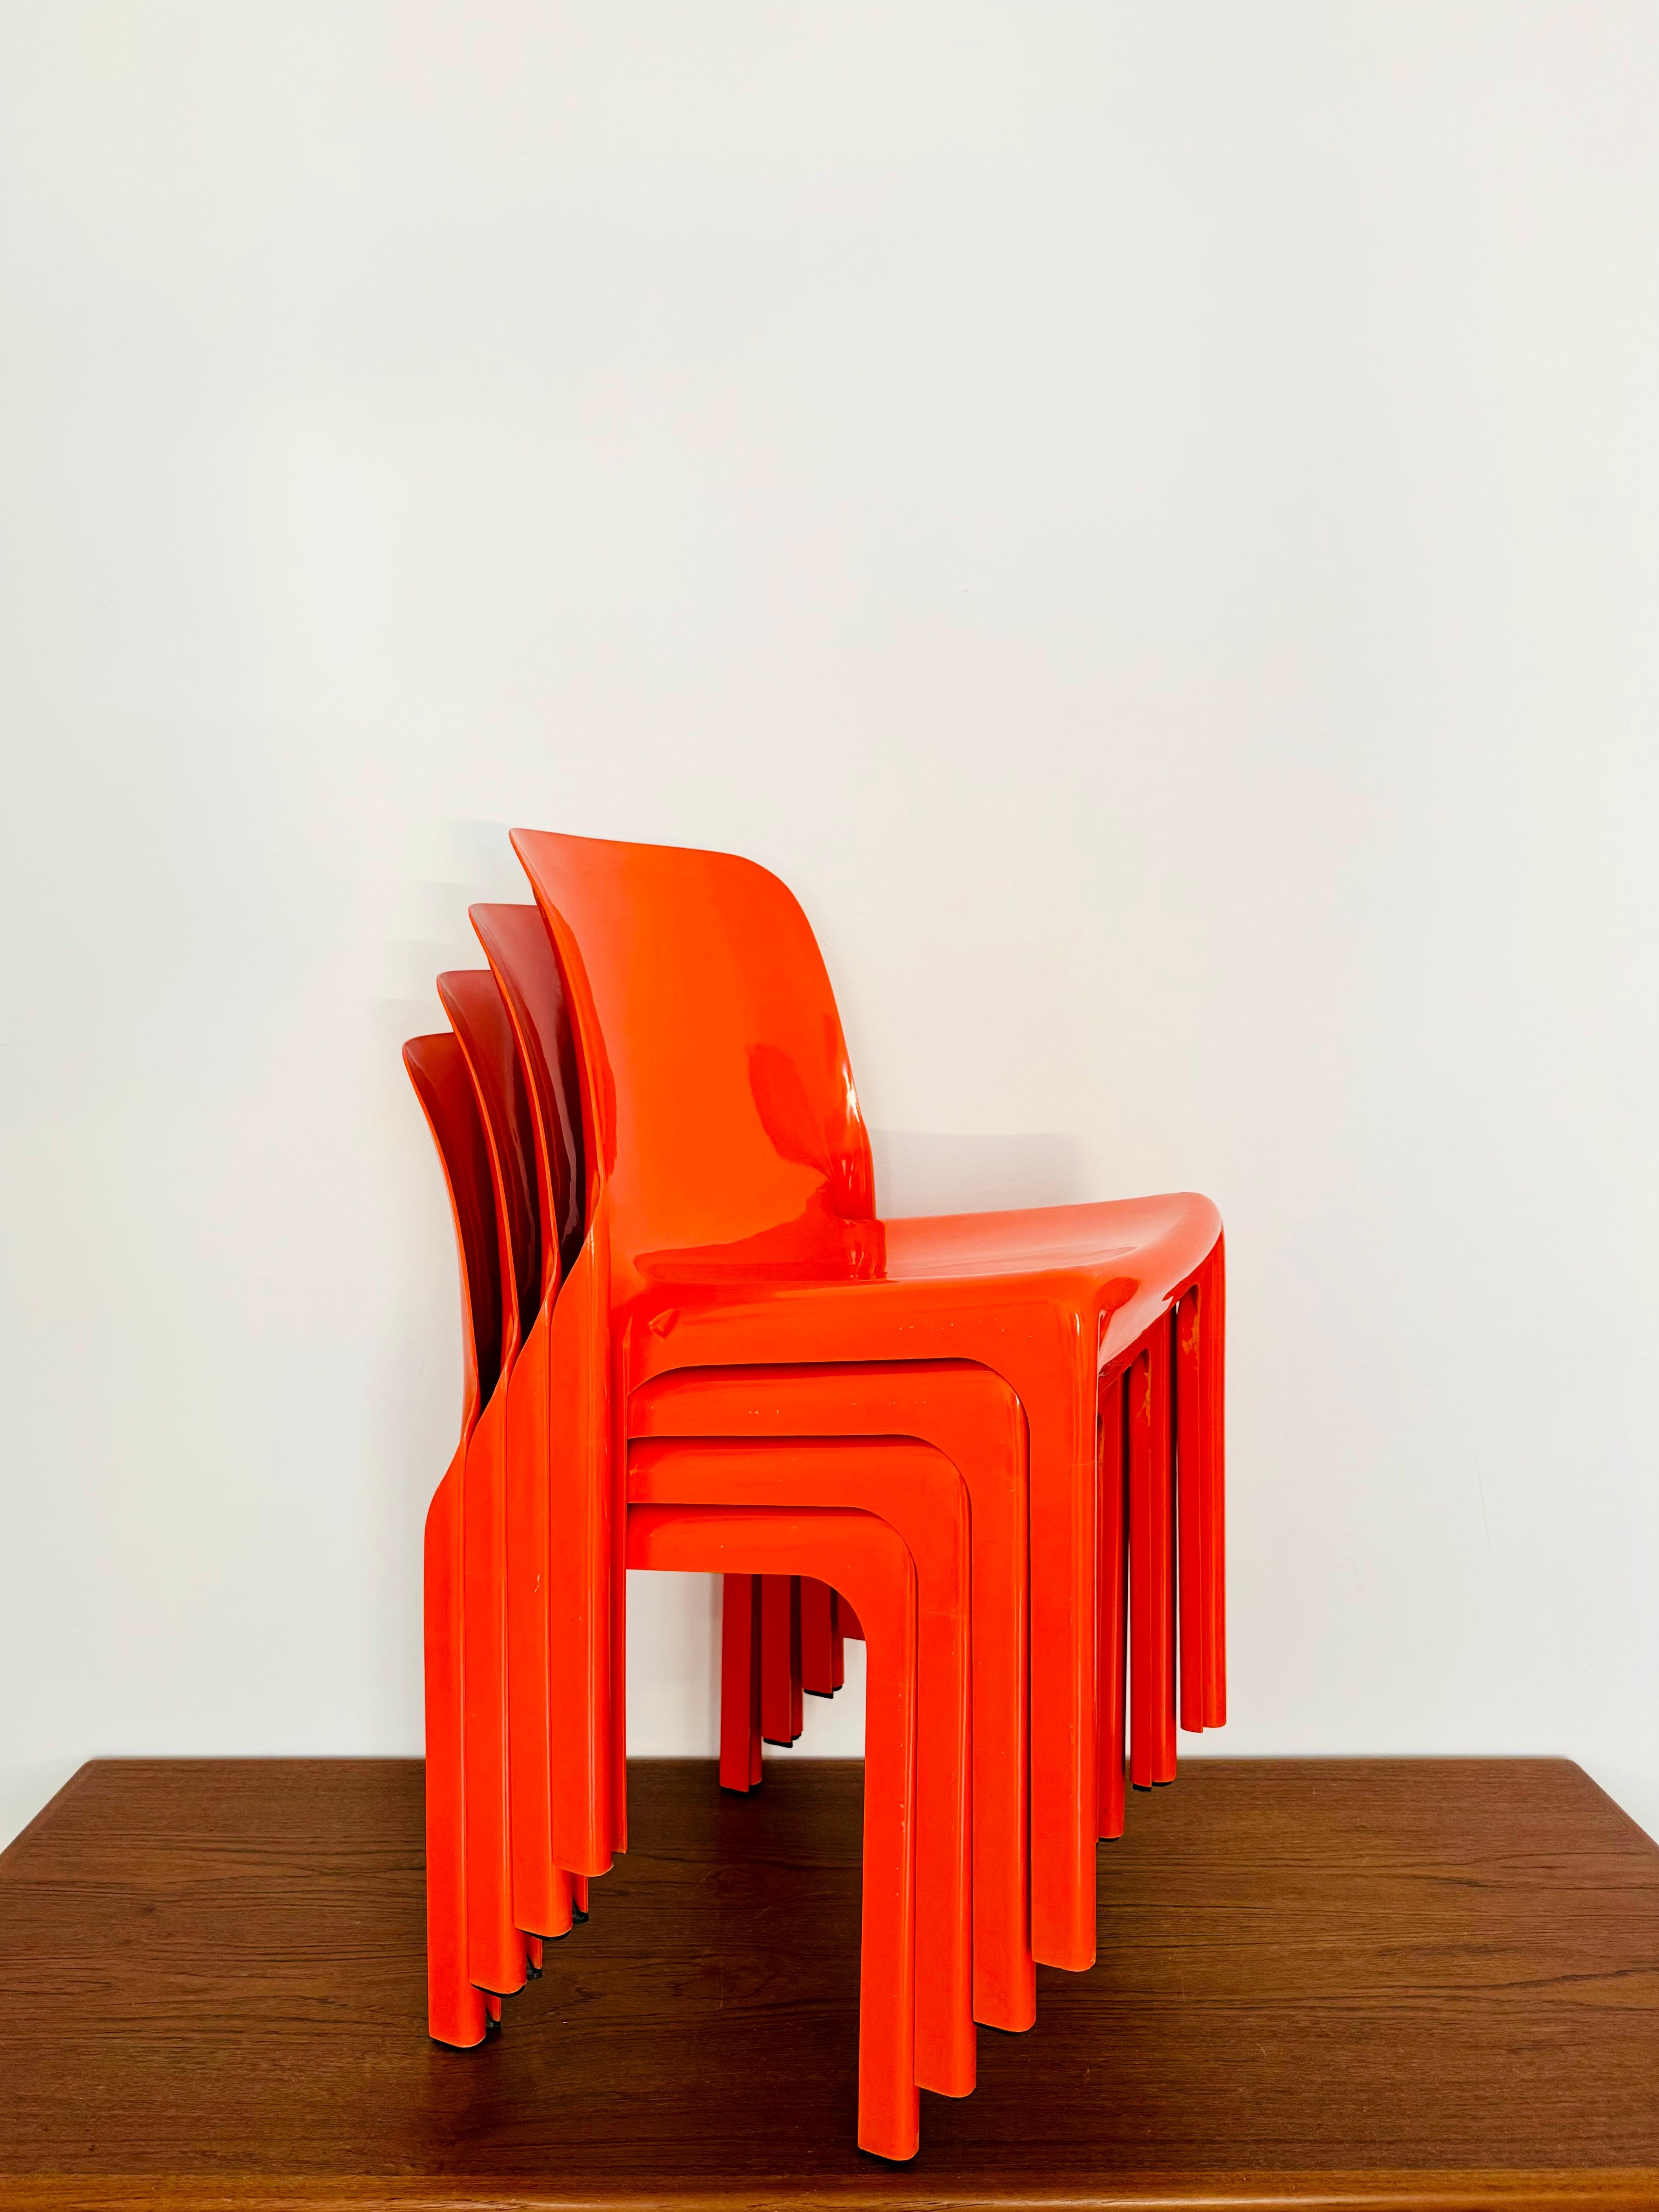 Stunning Italian plastic chairs from the 1970s.
Extremely successful design and an enrichment for every home.
The chairs are both comfortable and stackable to save space.

Design: Vico Magistretti
Manufacturer: Artemide Milano
Model: